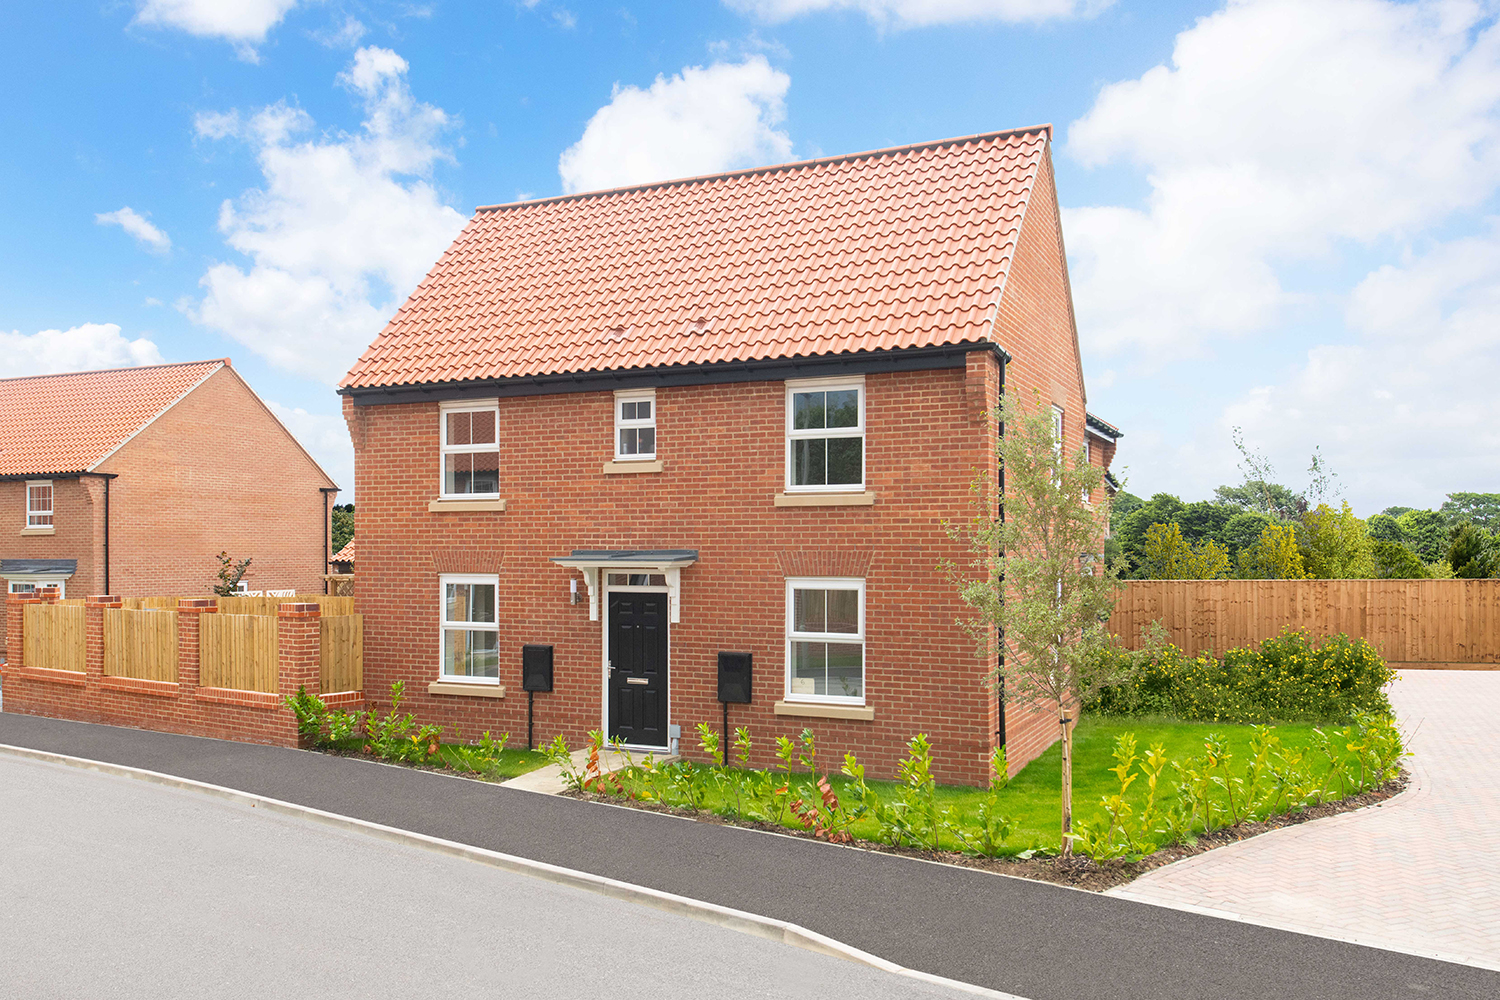 Property 1 of 10. The Hadley At St Johns View, Cayton